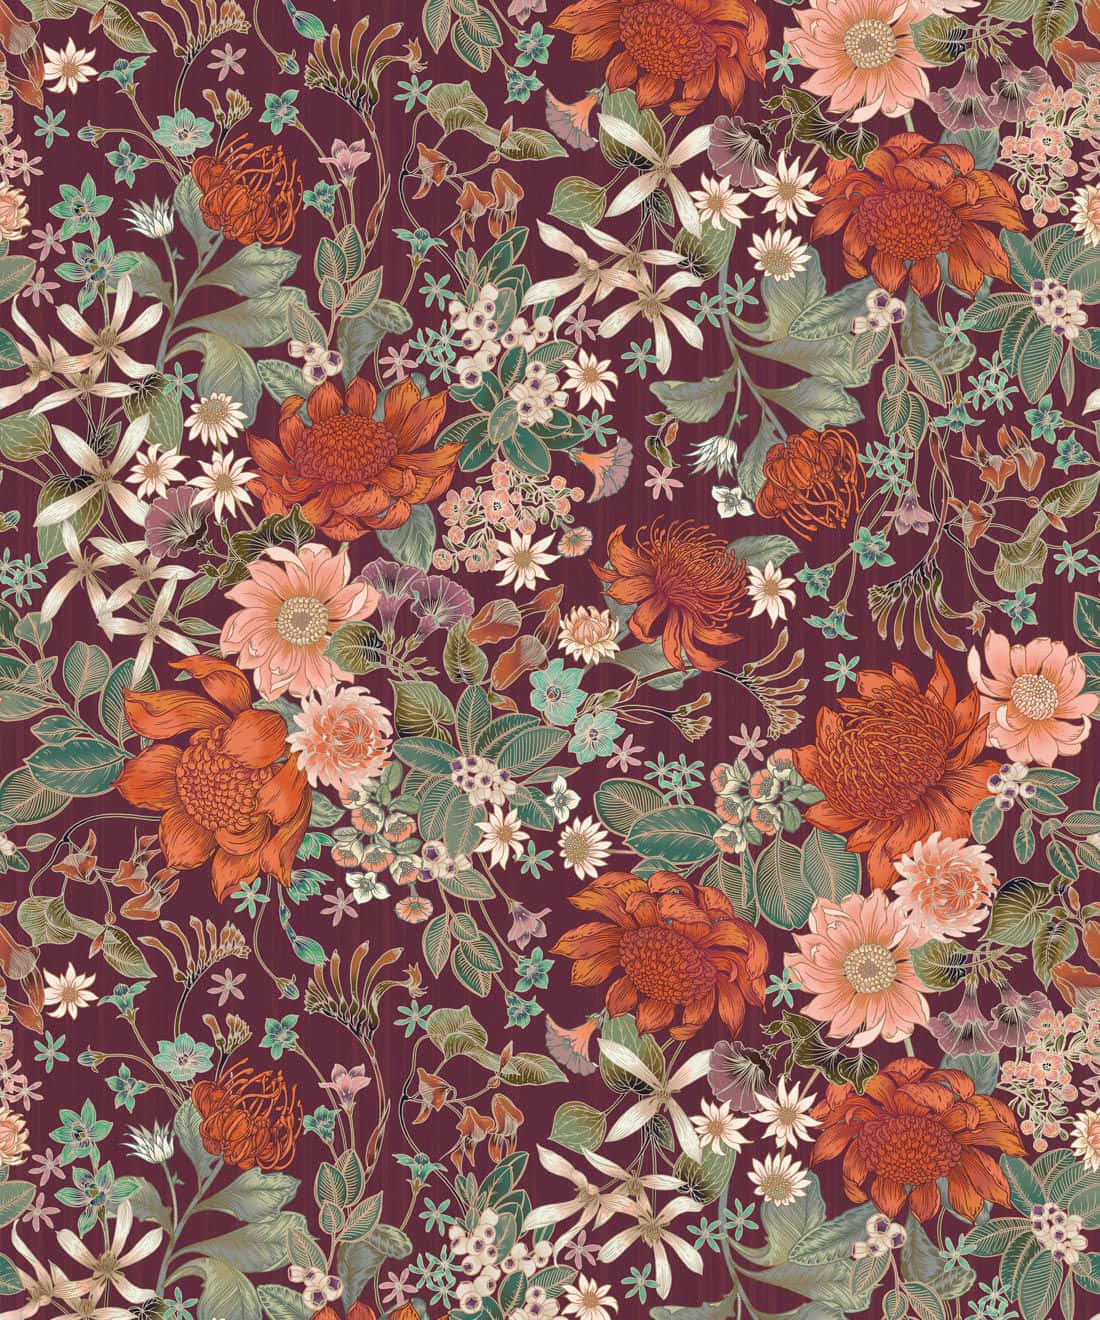 A Floral Pattern In Burgundy And Orange